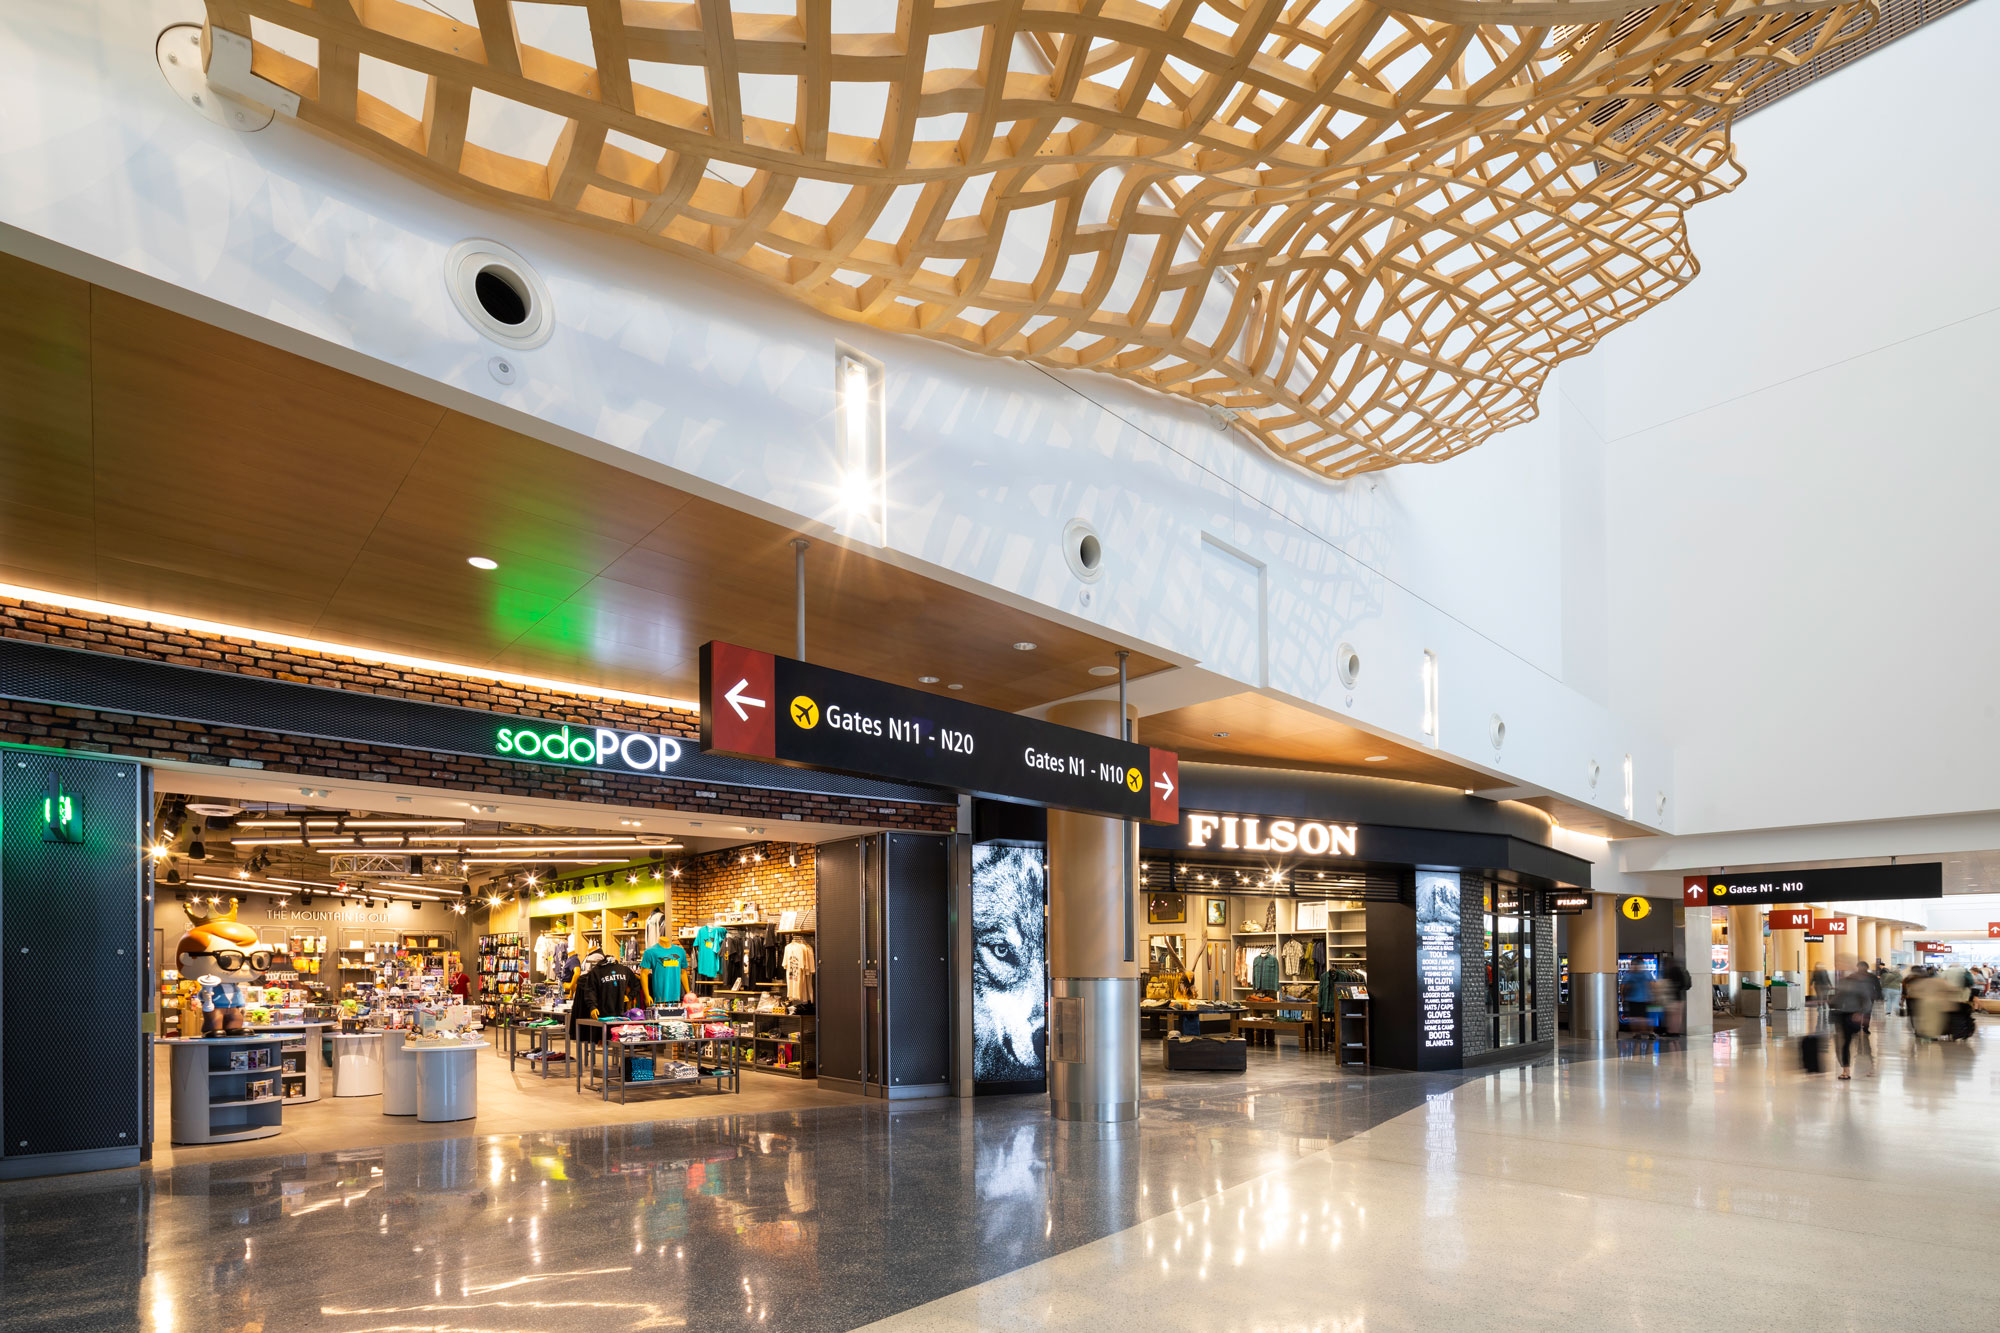 SEA Airport - sodoPOP and Filson store fronts in the North Concourse